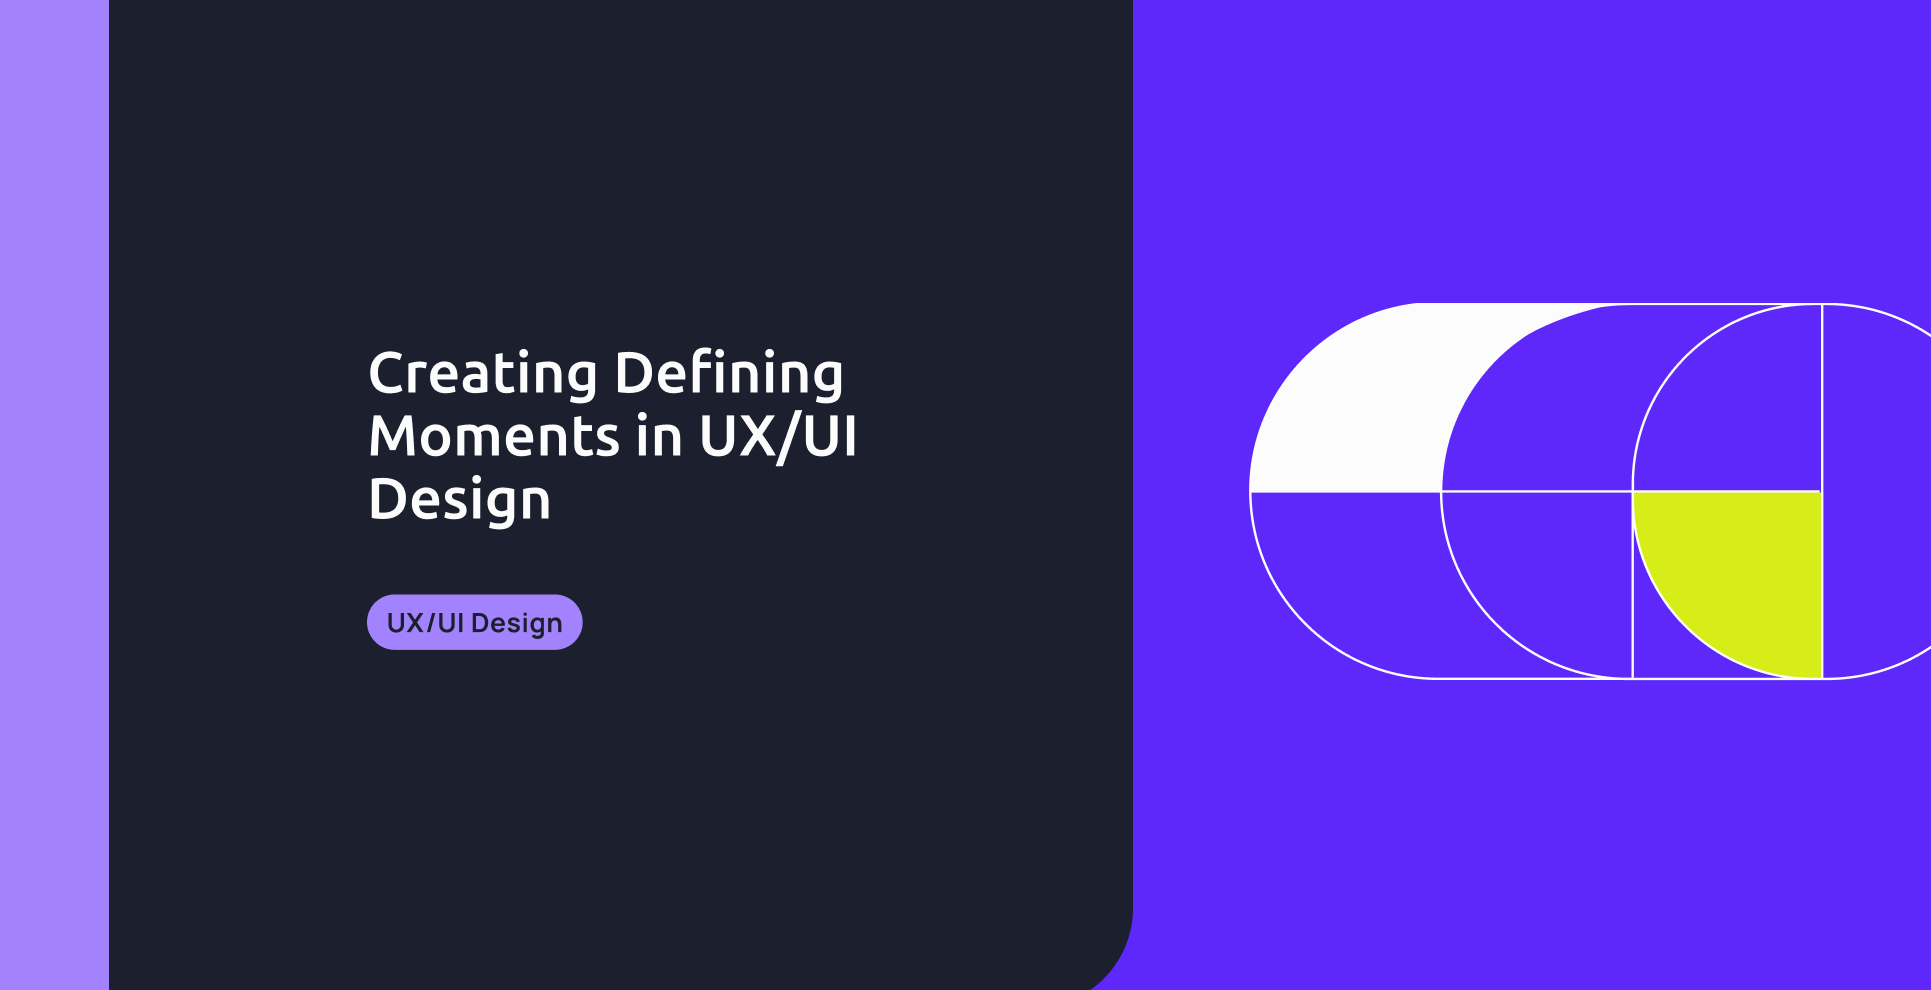 Creating defining moments in UX/UI design